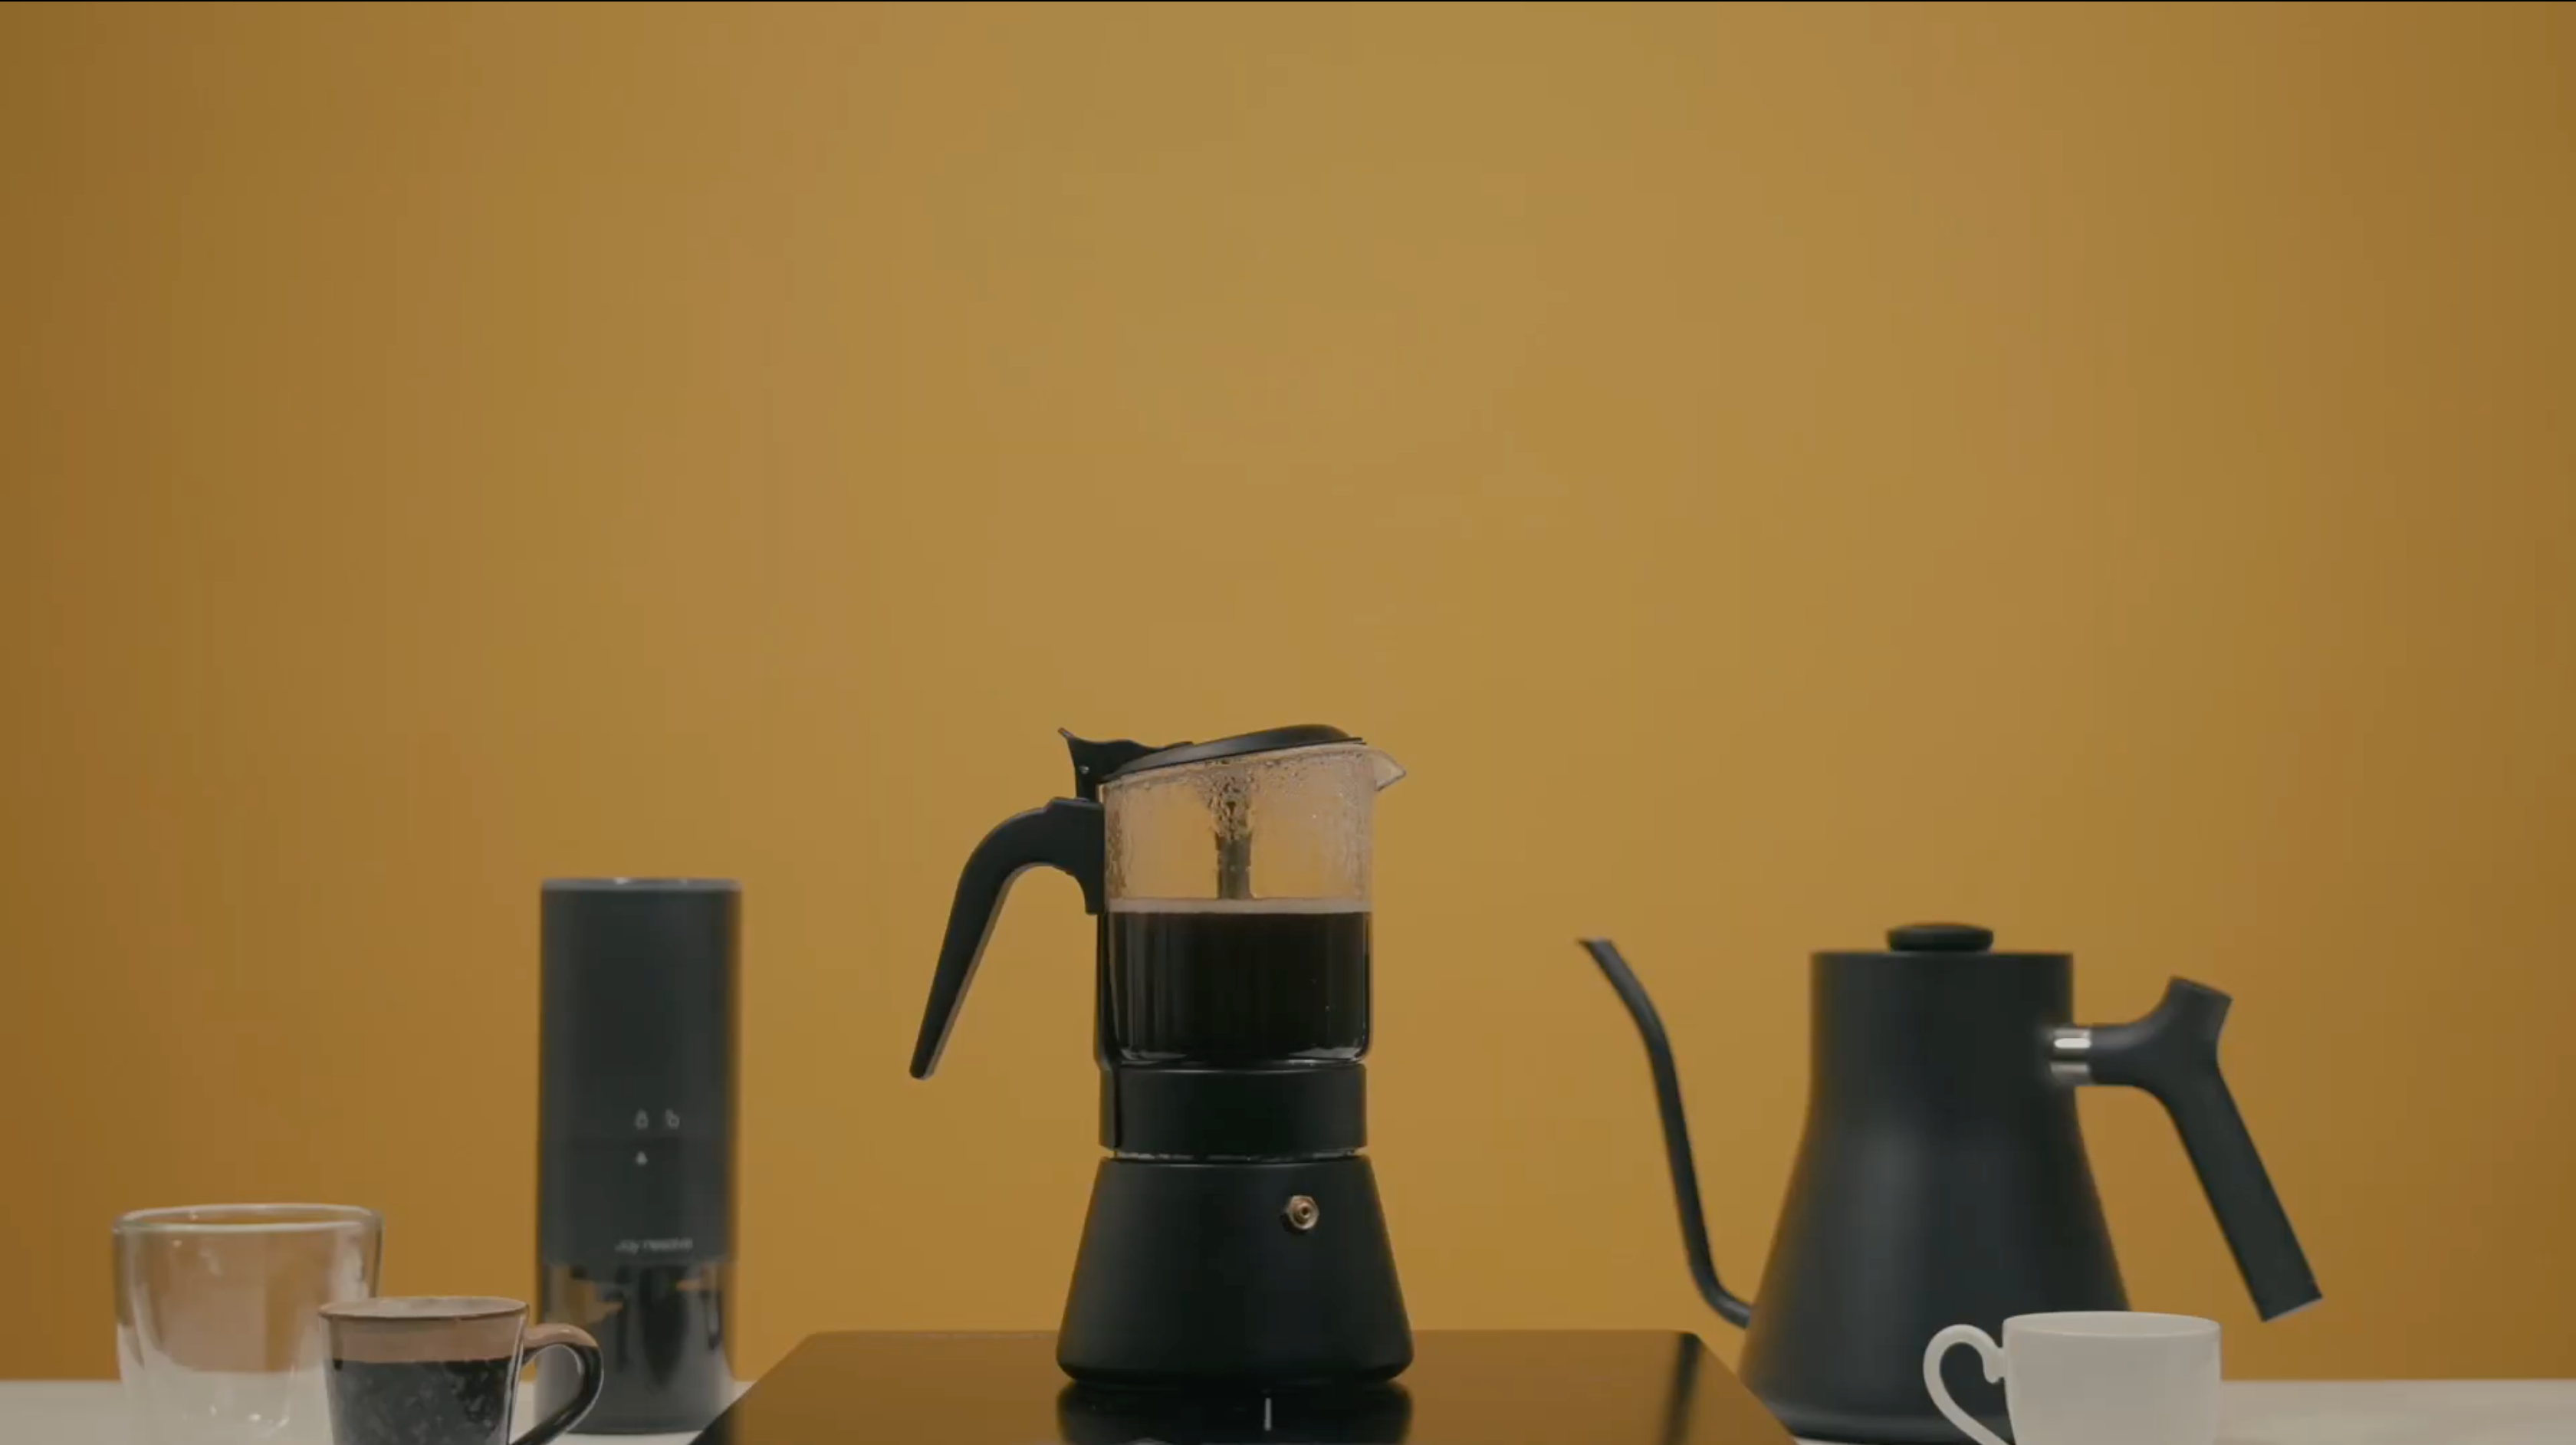 The ClearBrew Moka Pot is HERE